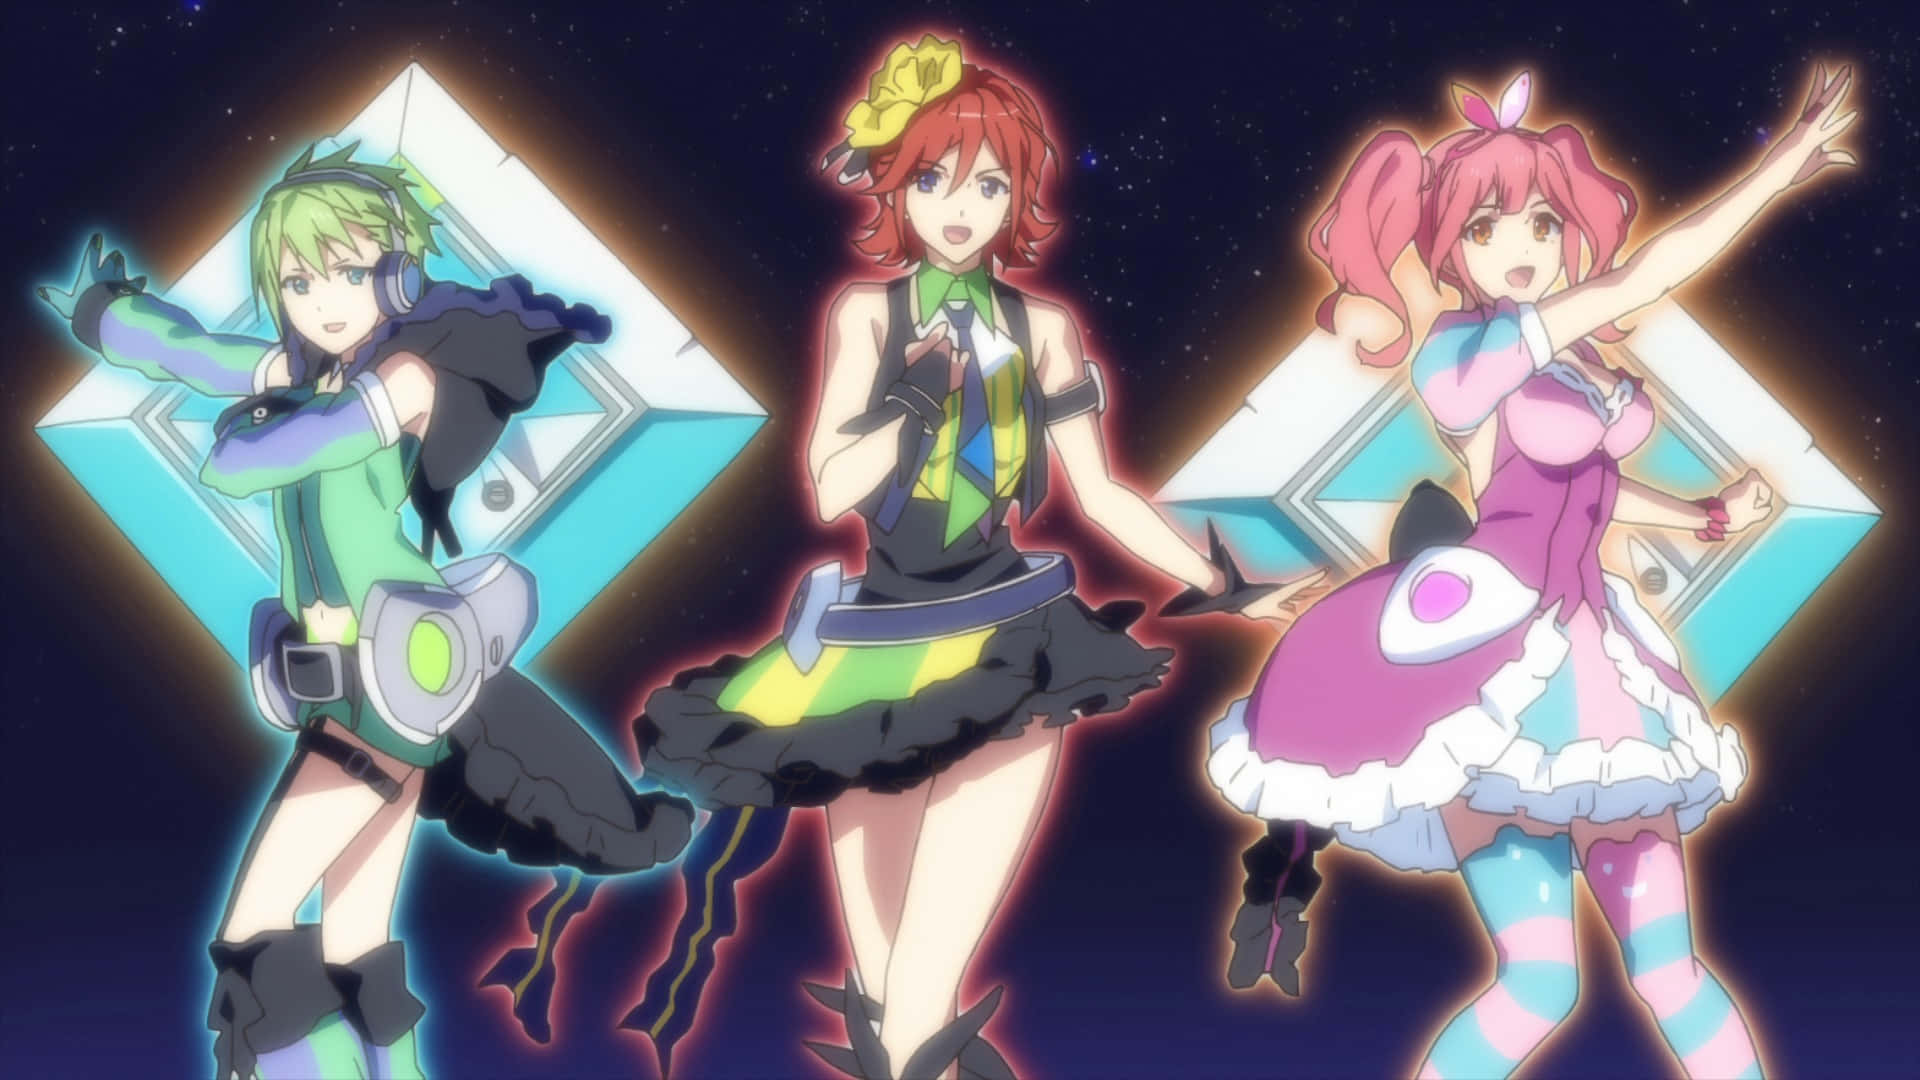 Go beyond the limits with Macross